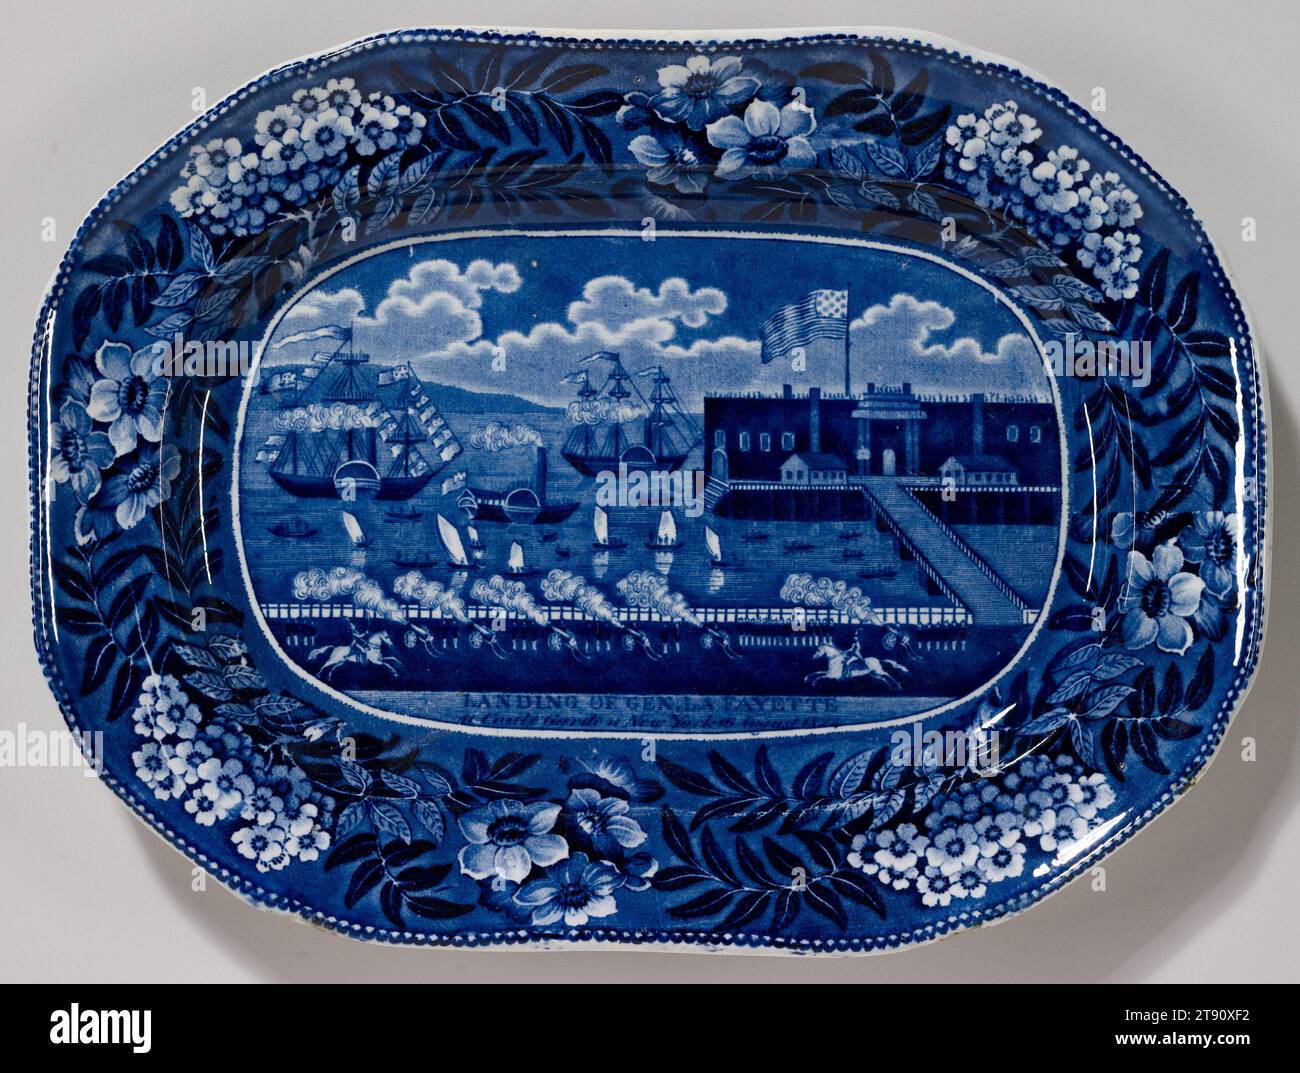 Platter, c. 1825, James & Ralph Clews, English, Cobridge, Staffordshire, England, 1818 - 1834, 1 1/4 x 12 x 9in. (3.2 x 30.5 x 22.9cm), Porcelain, England, 19th century, This platter commemorates Revolutionary War hero General Lafayette's landing in New York for his famous tour in 1824. It illustrates how Staffordshire potteries developed industrial production techniques, such as transfer-printing, which consisted of printing decoration onto tissue which was affixed to the ceramic body before firing; the paper burns away in the kiln while the ink remains. This allowed to increase production Stock Photo